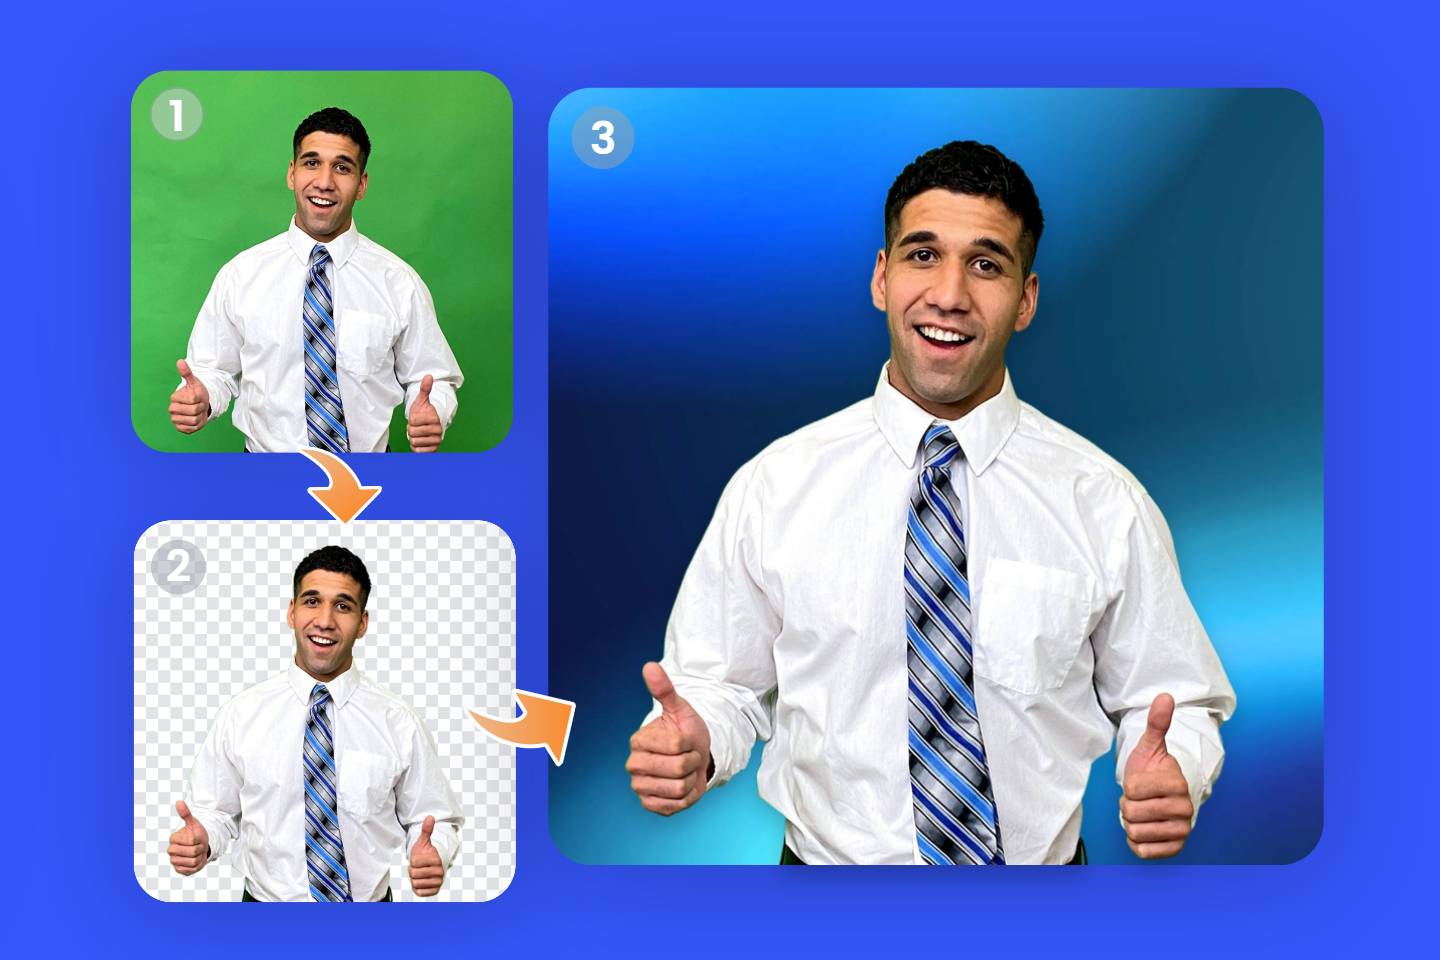 Remove the green screen and add a gradient bule background to a man image in suit and tie